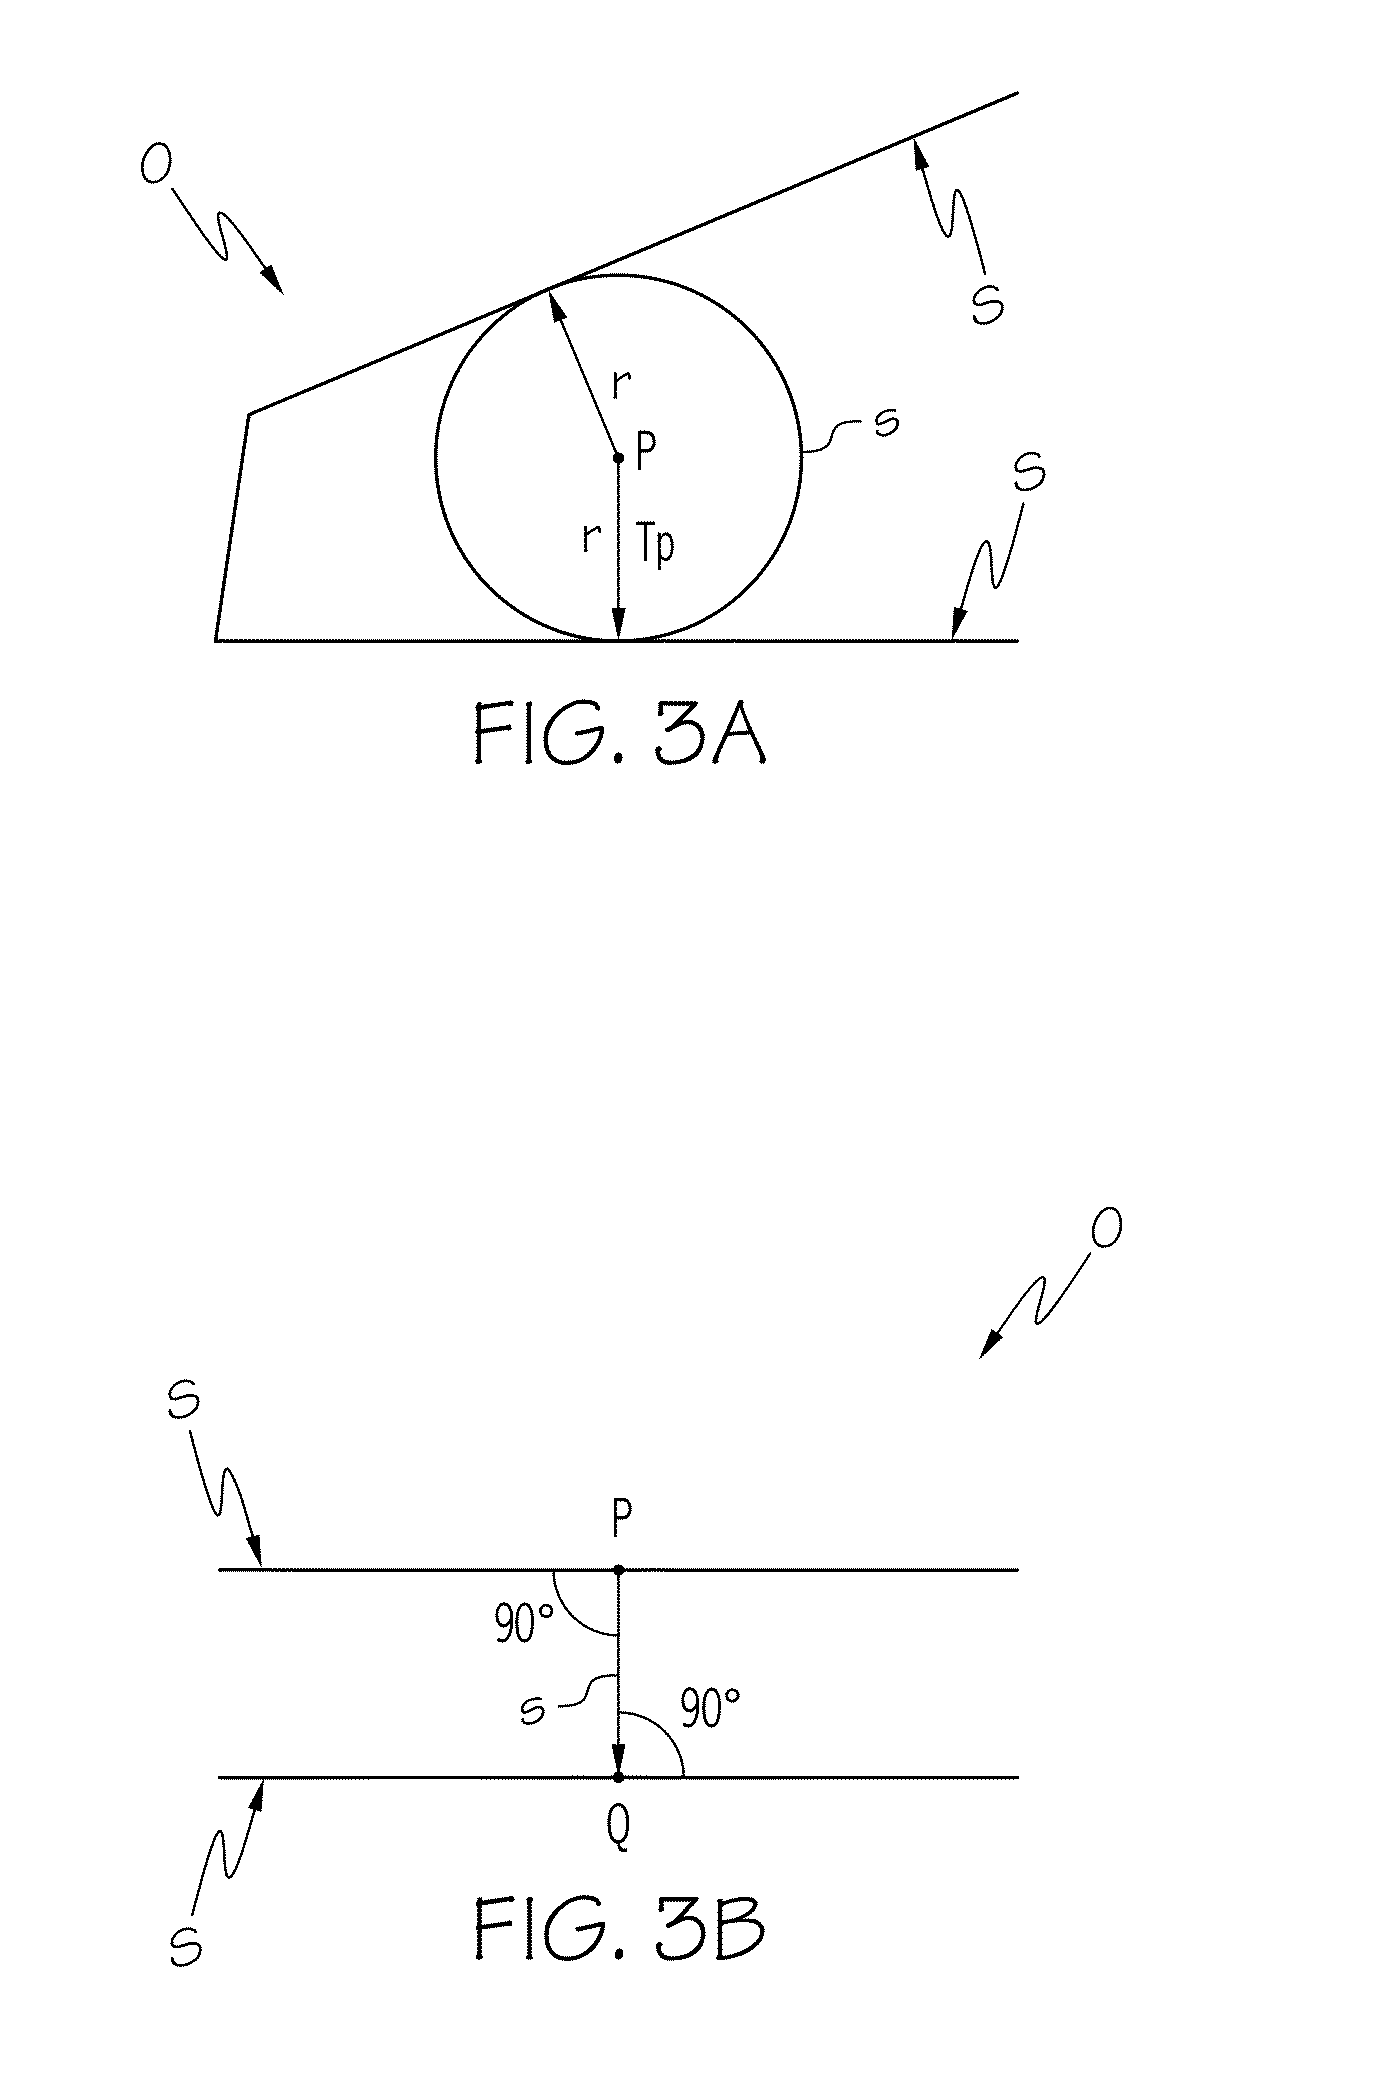 Method to incorporate skin and core material properties in performance analysis of high pressure die casting aluminum components